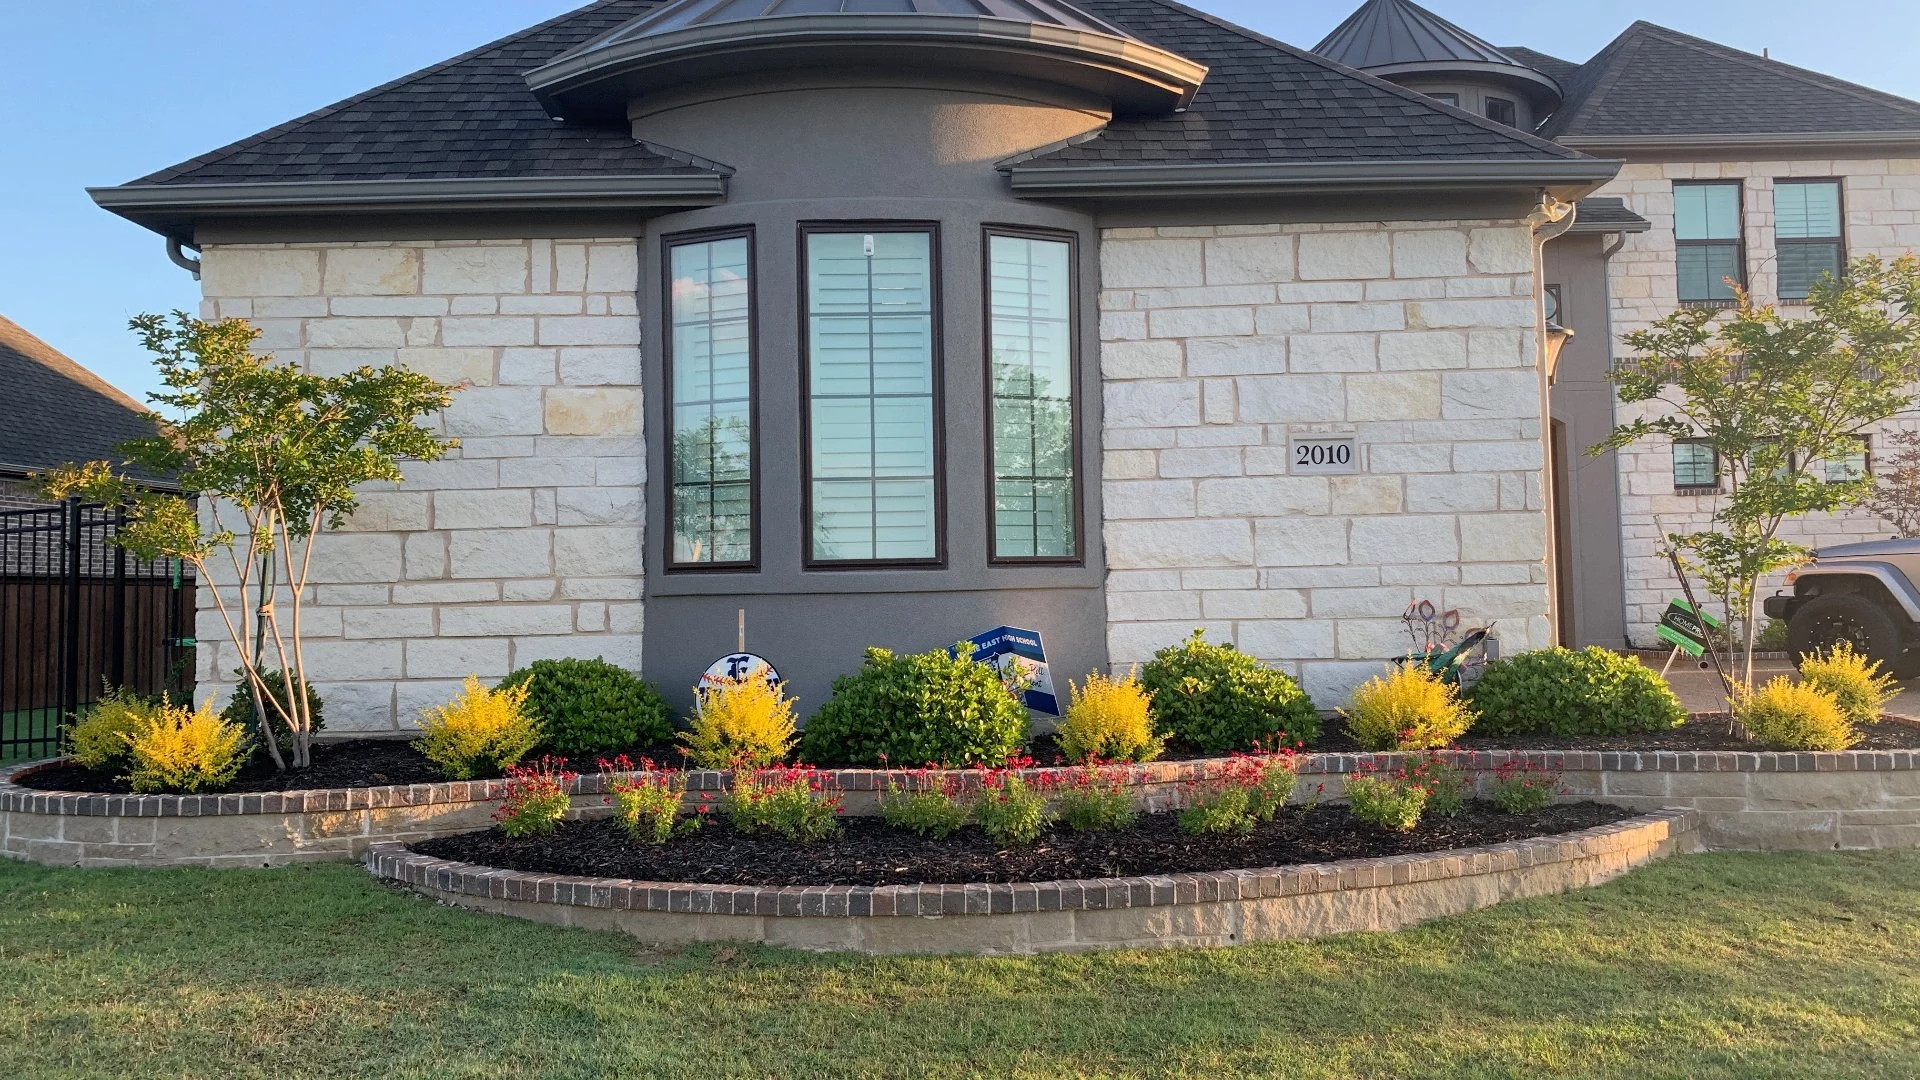 House in Plano, TX with landscaping.